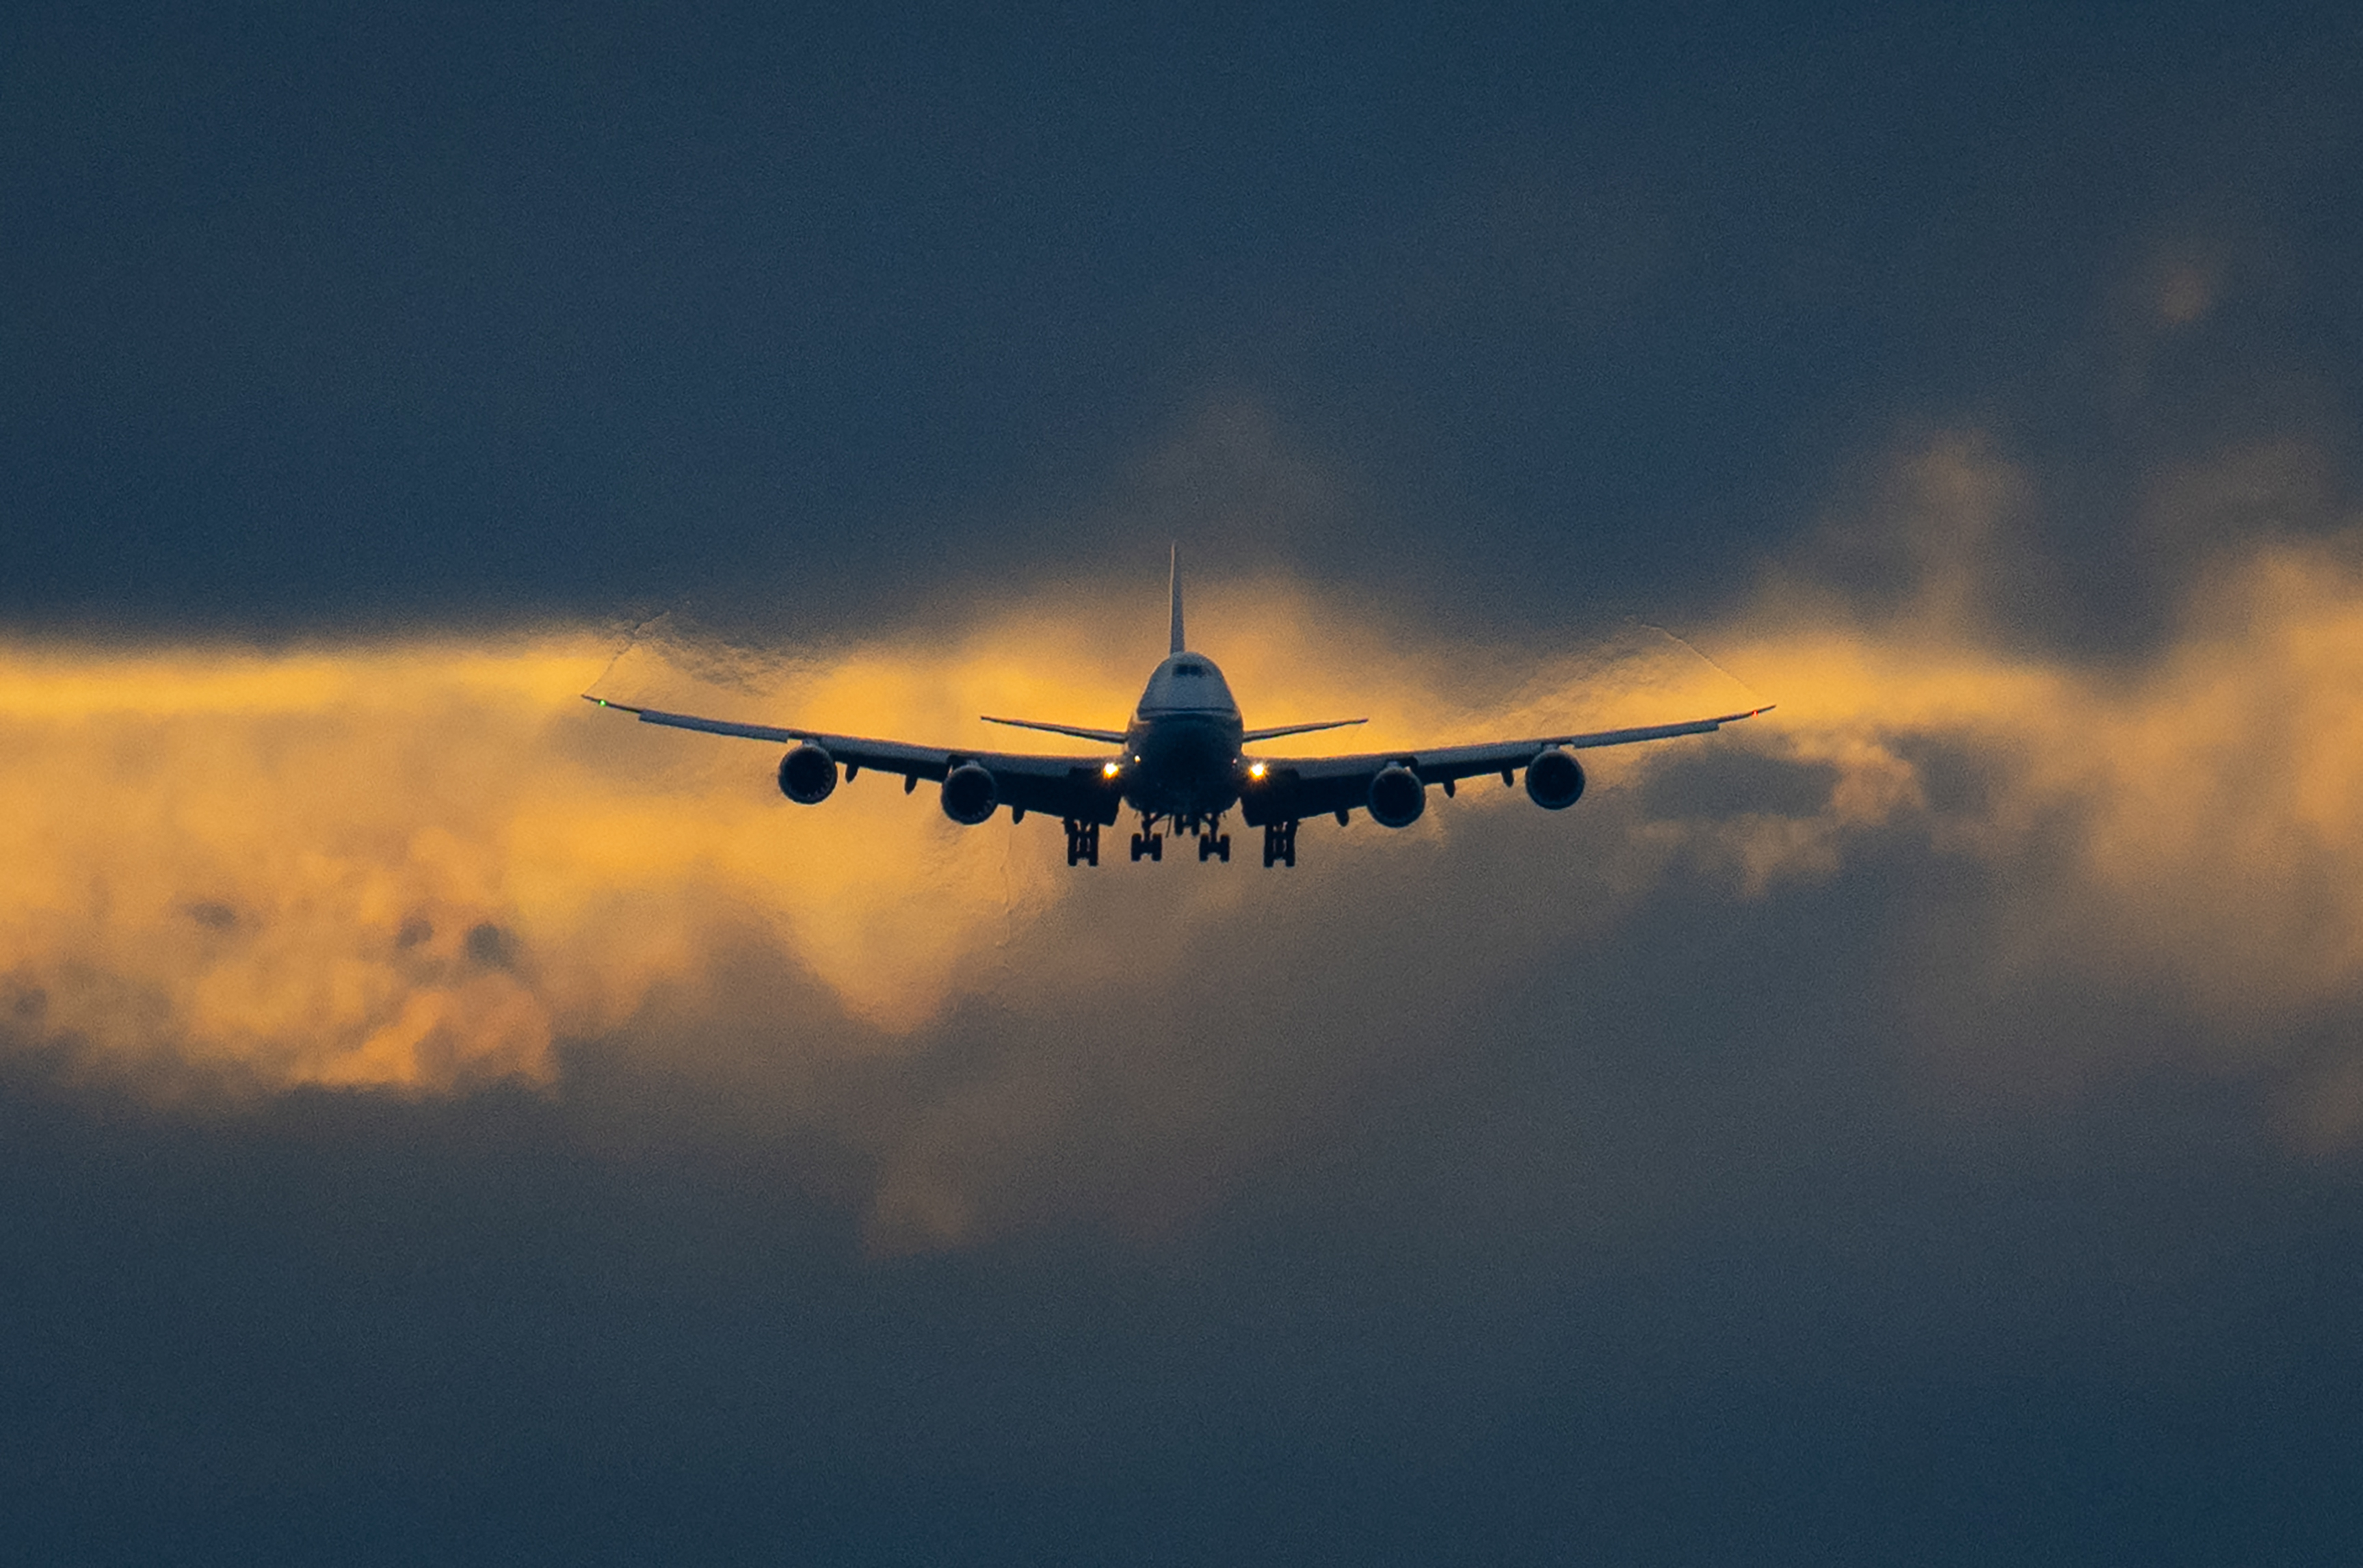 Airplane silhouetted against cloudy sky, with light from sunset visible in the background